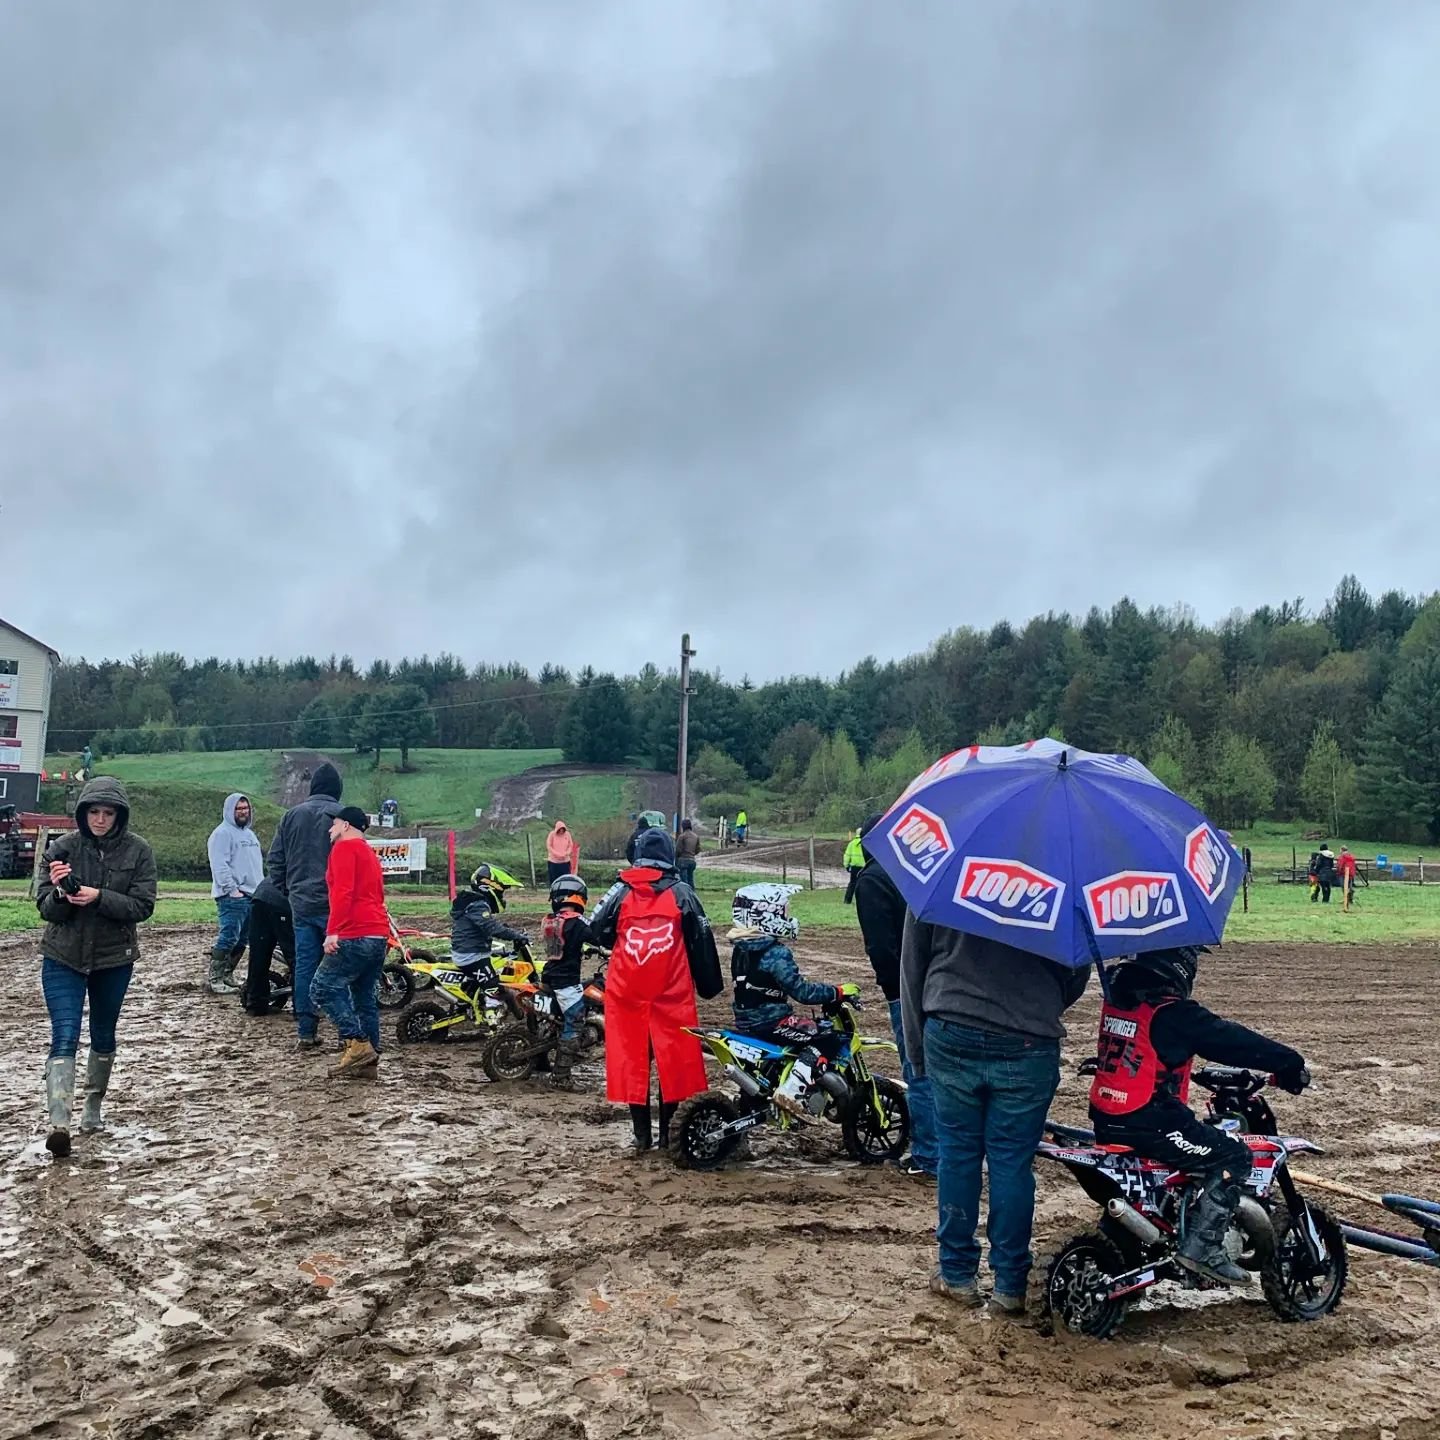 A big thank you to everyone who came out this weekend. Saturday practice was excellent but today the rain came early and did not leave unfortunately.
A huge thank you to all our staff for dealing with the elements and sticking with us. 

We hope to s